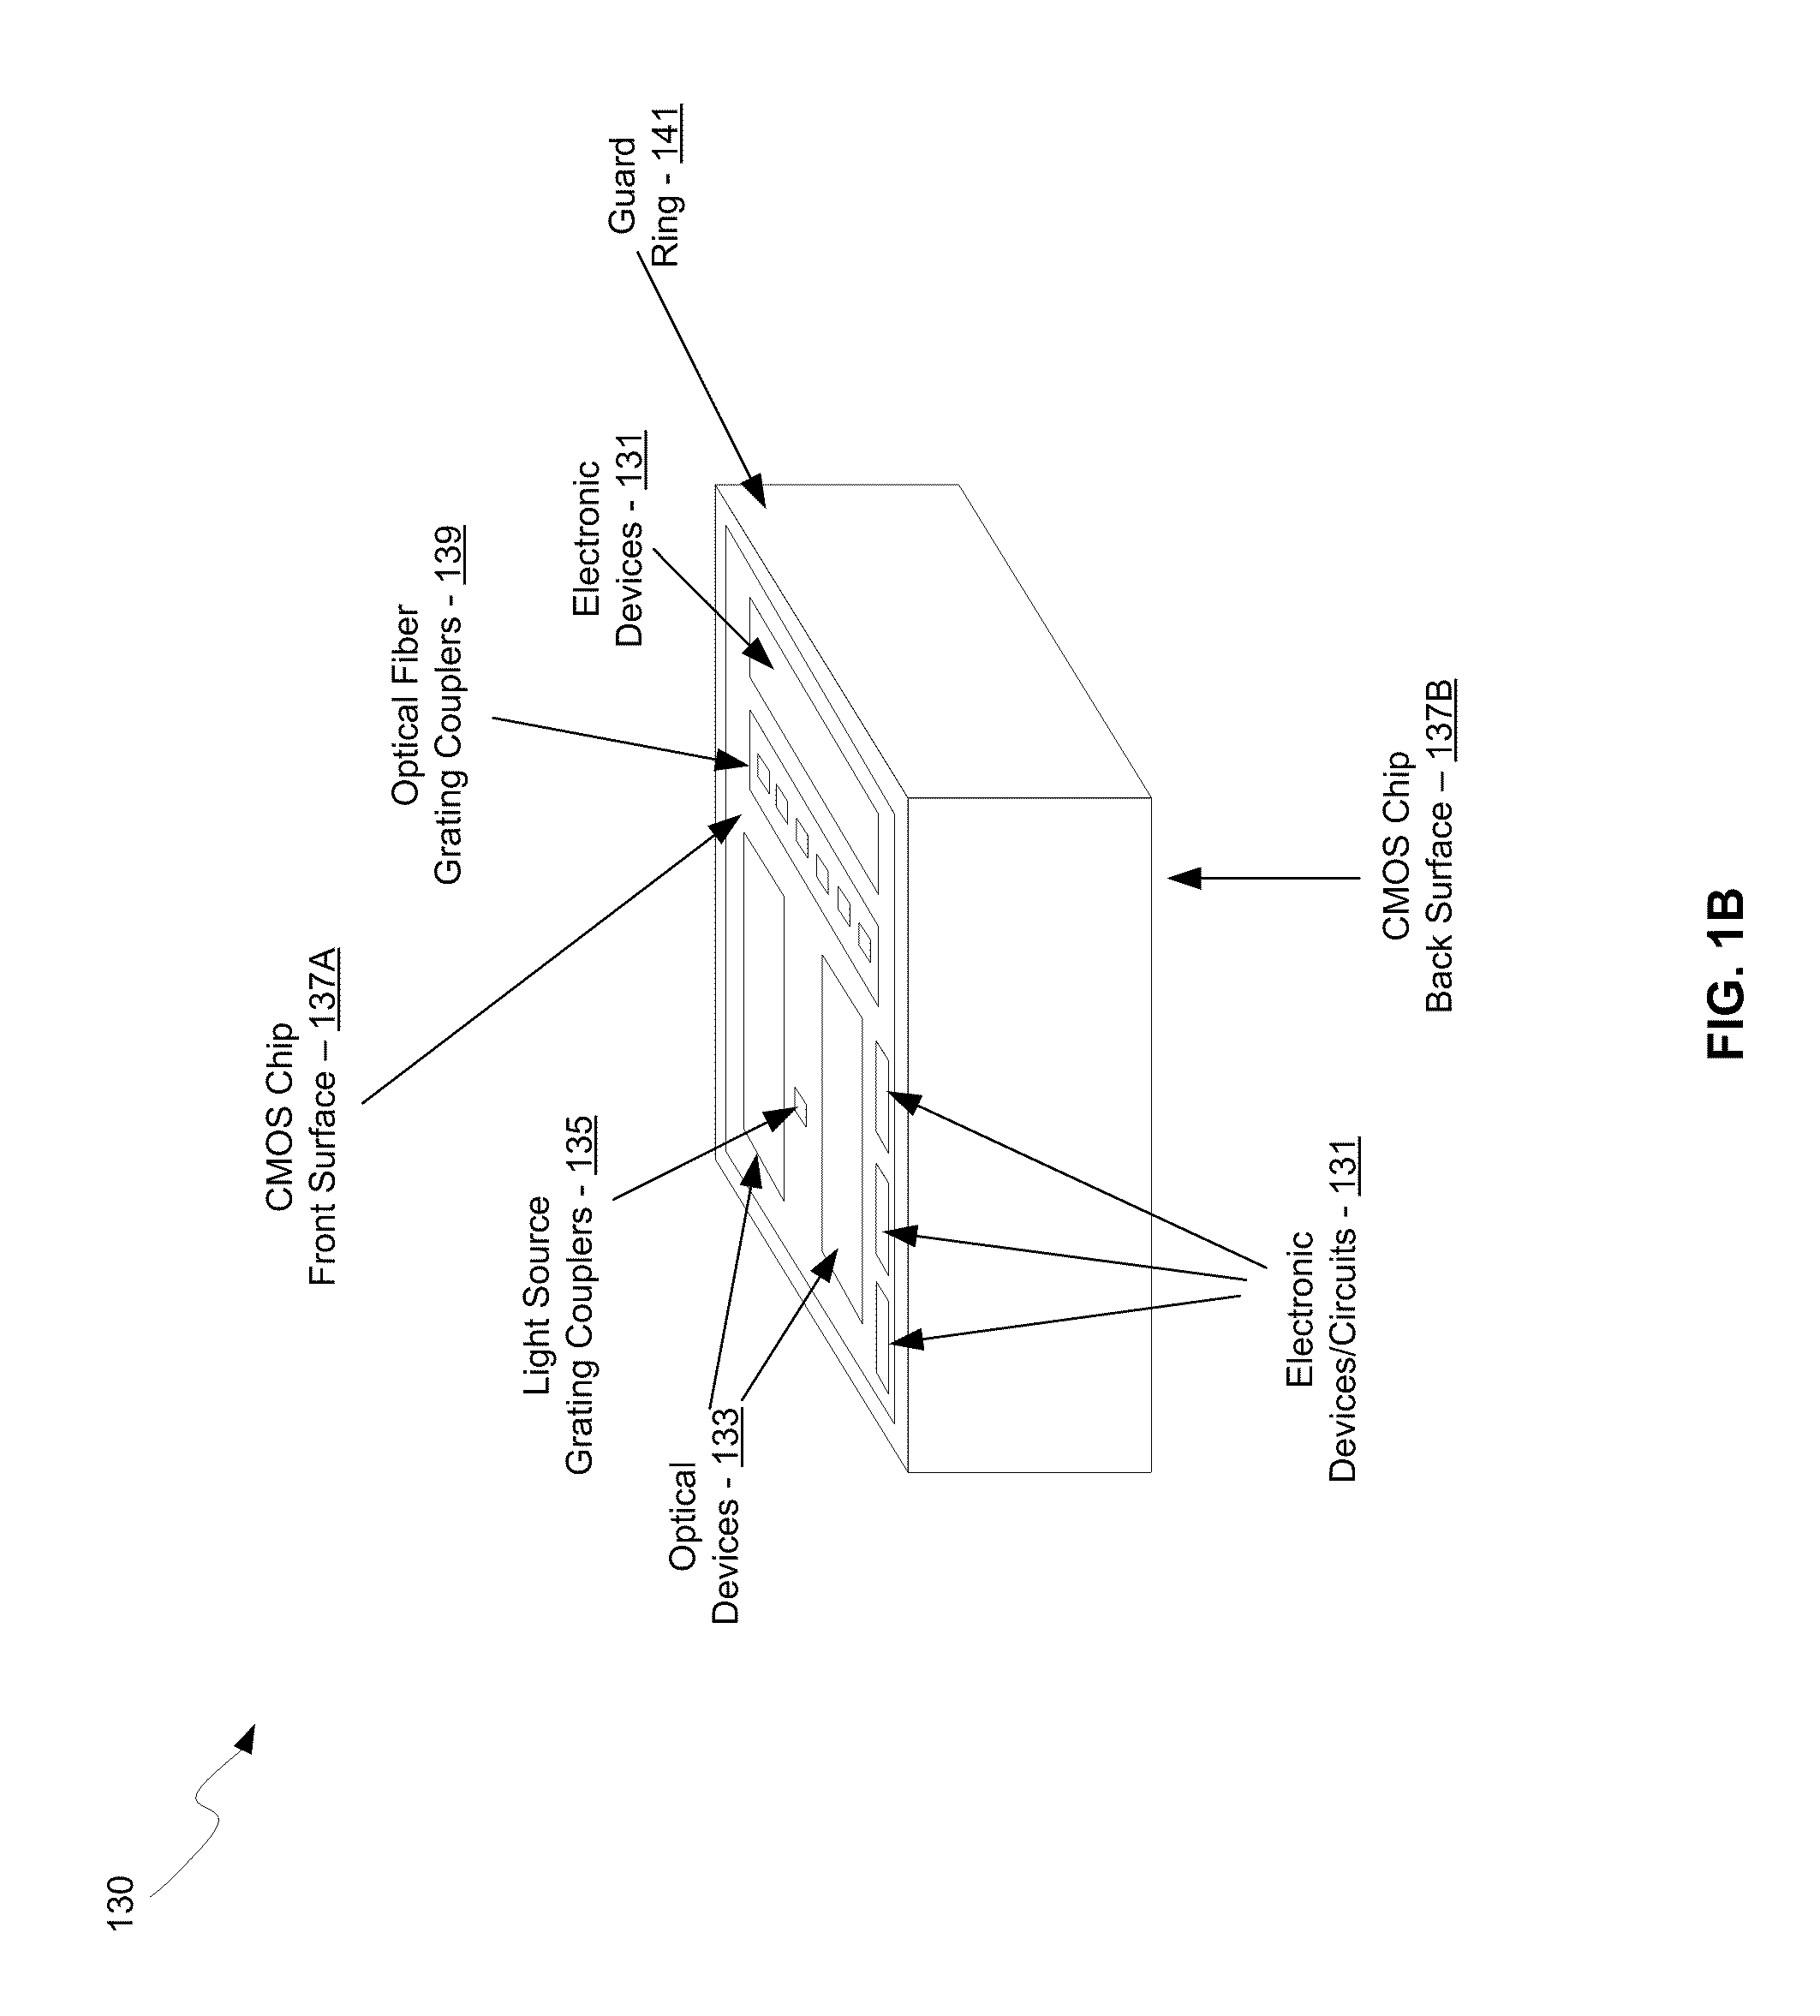 Method and System for Single Laser Bidirectional Links